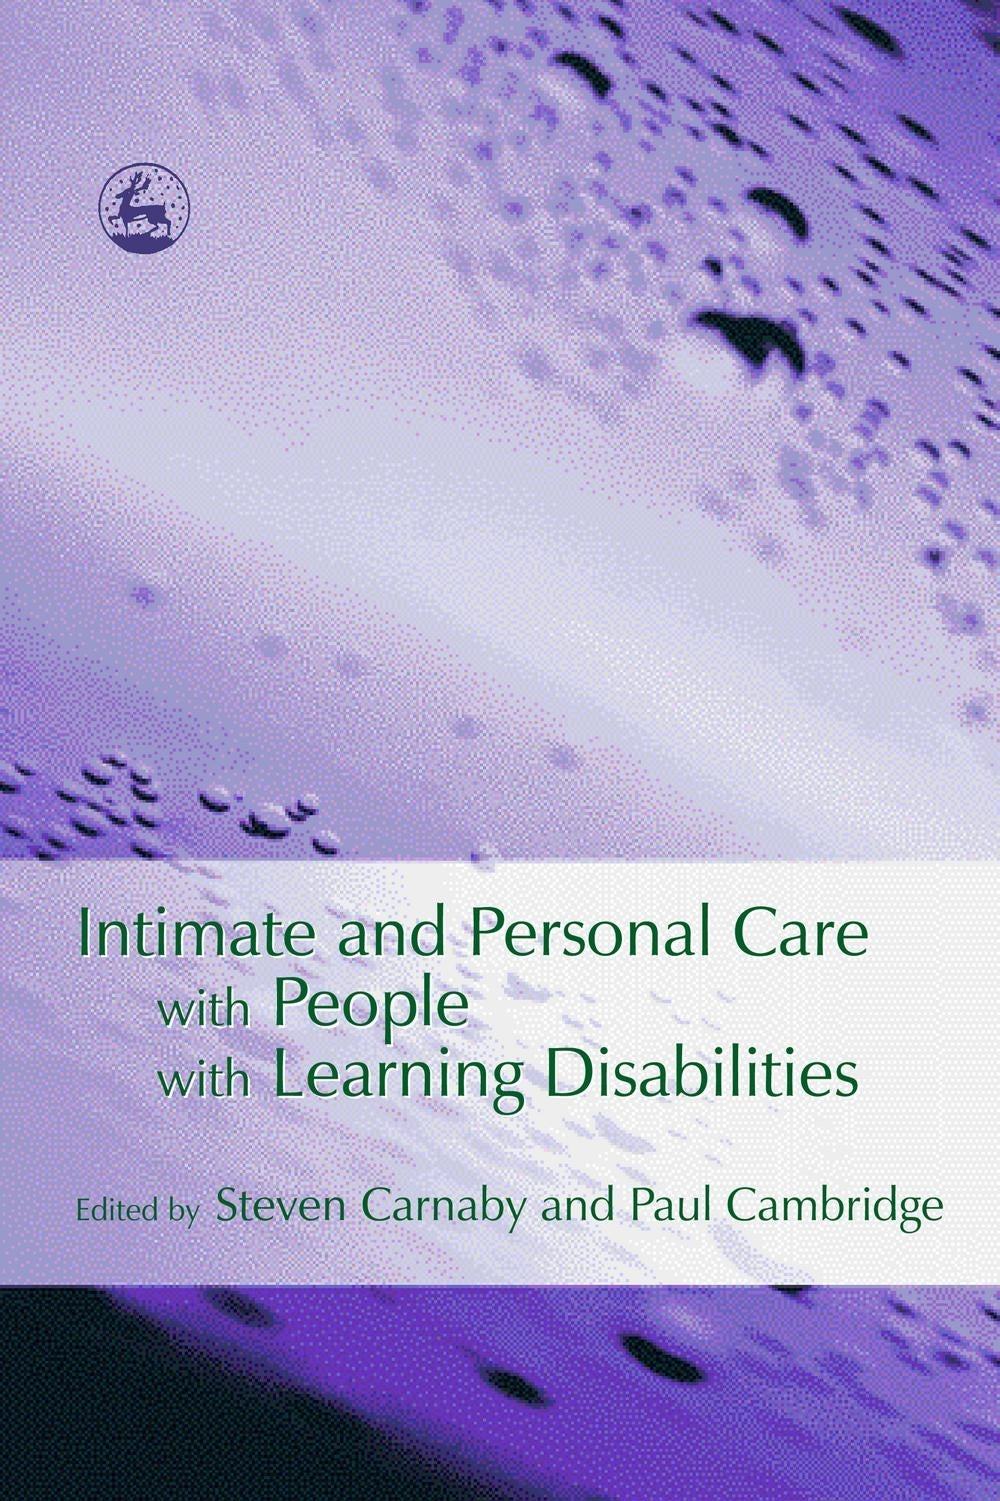 Intimate and Personal Care with People with Learning Disabilities by Paul Cambridge, Steven Carnaby